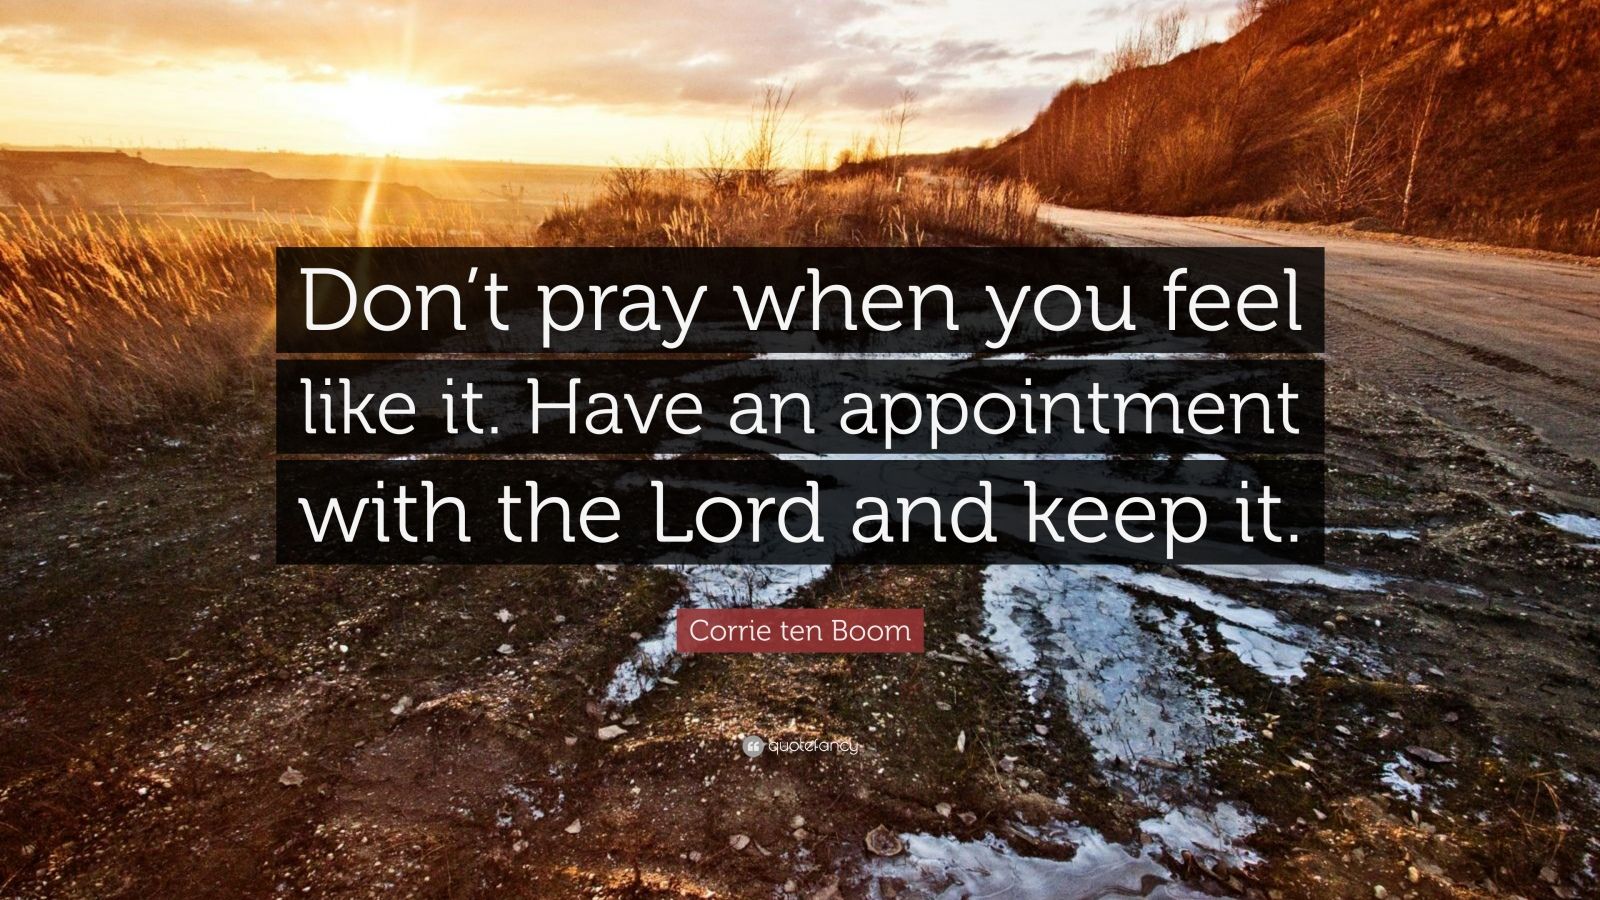 Corrie ten Boom Quote: “Don’t pray when you feel like it. Have an